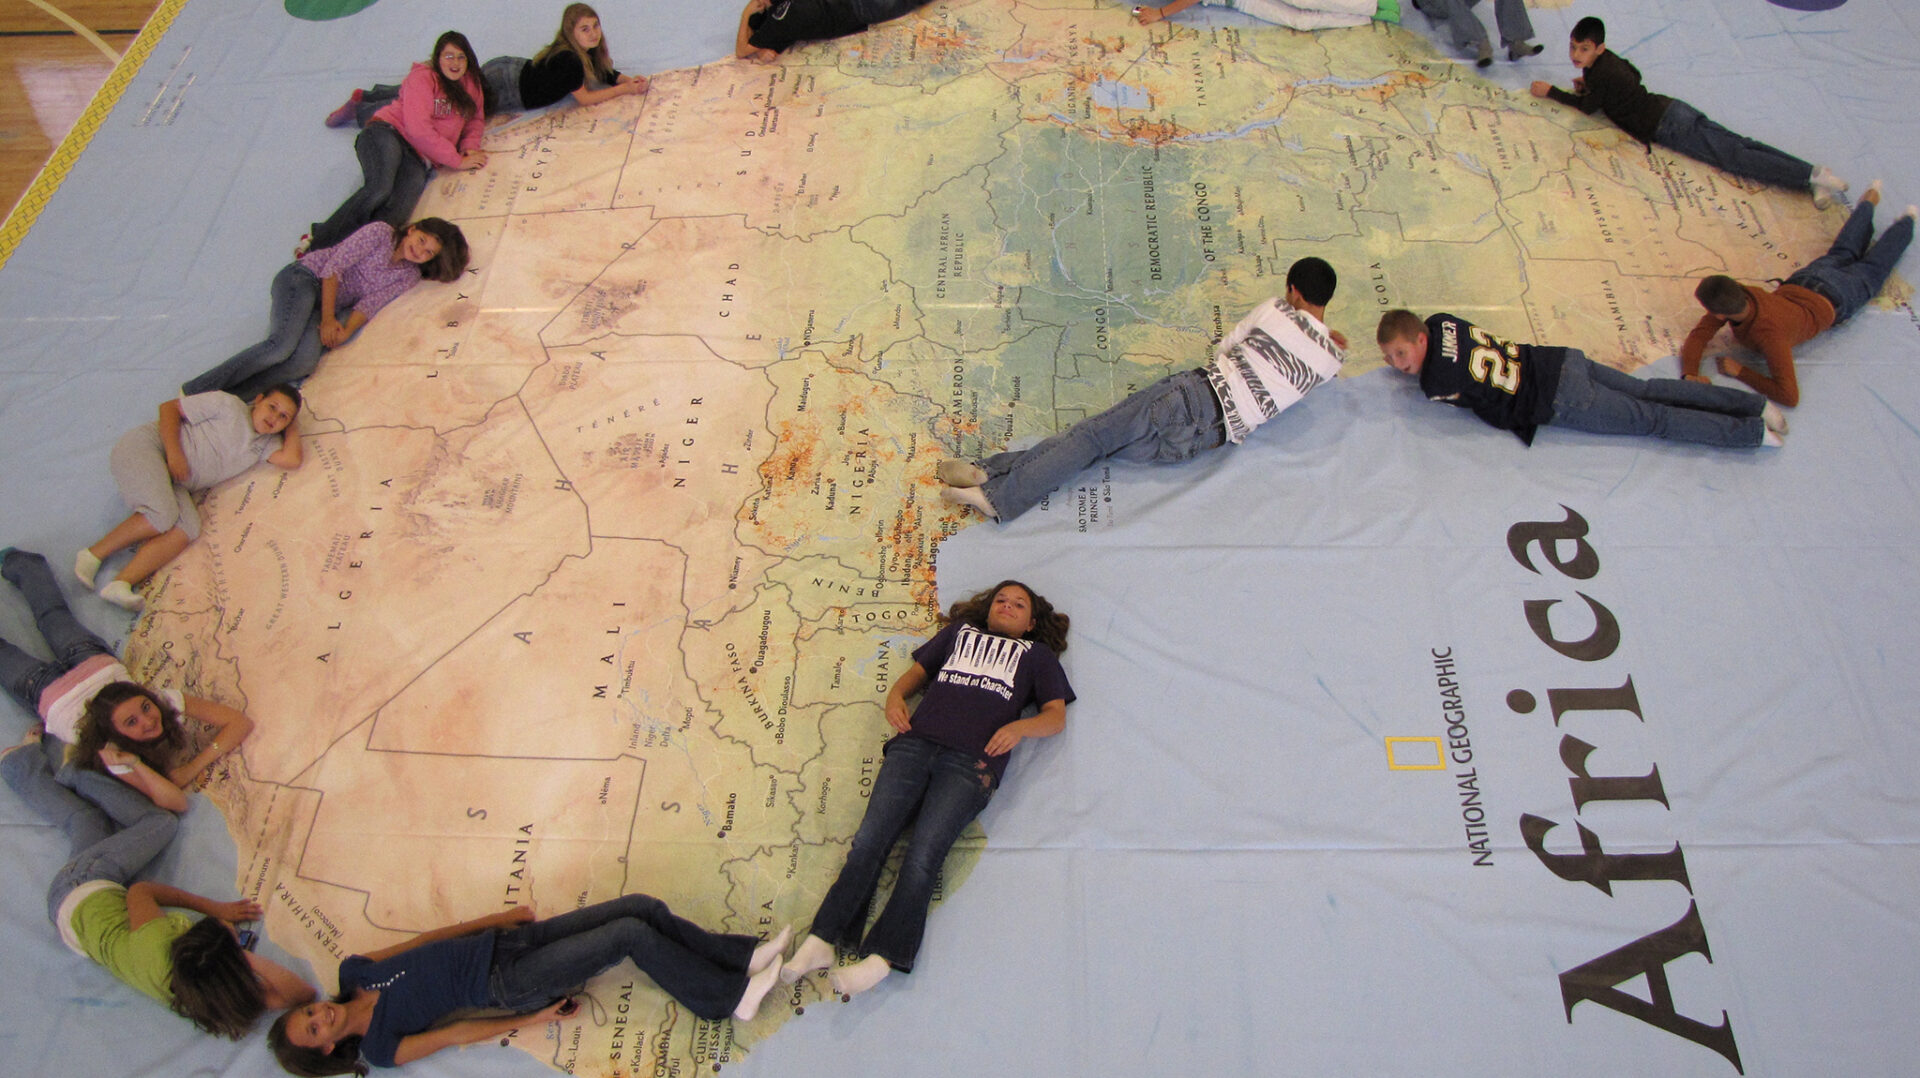 The Mississippi Geographic Alliance at the University of Mississippi is bringing the world’s largest map of Africa to schools in Oxford and Lafayette County, among other locations across the state this month. Photo courtesy of Paul Schoenike